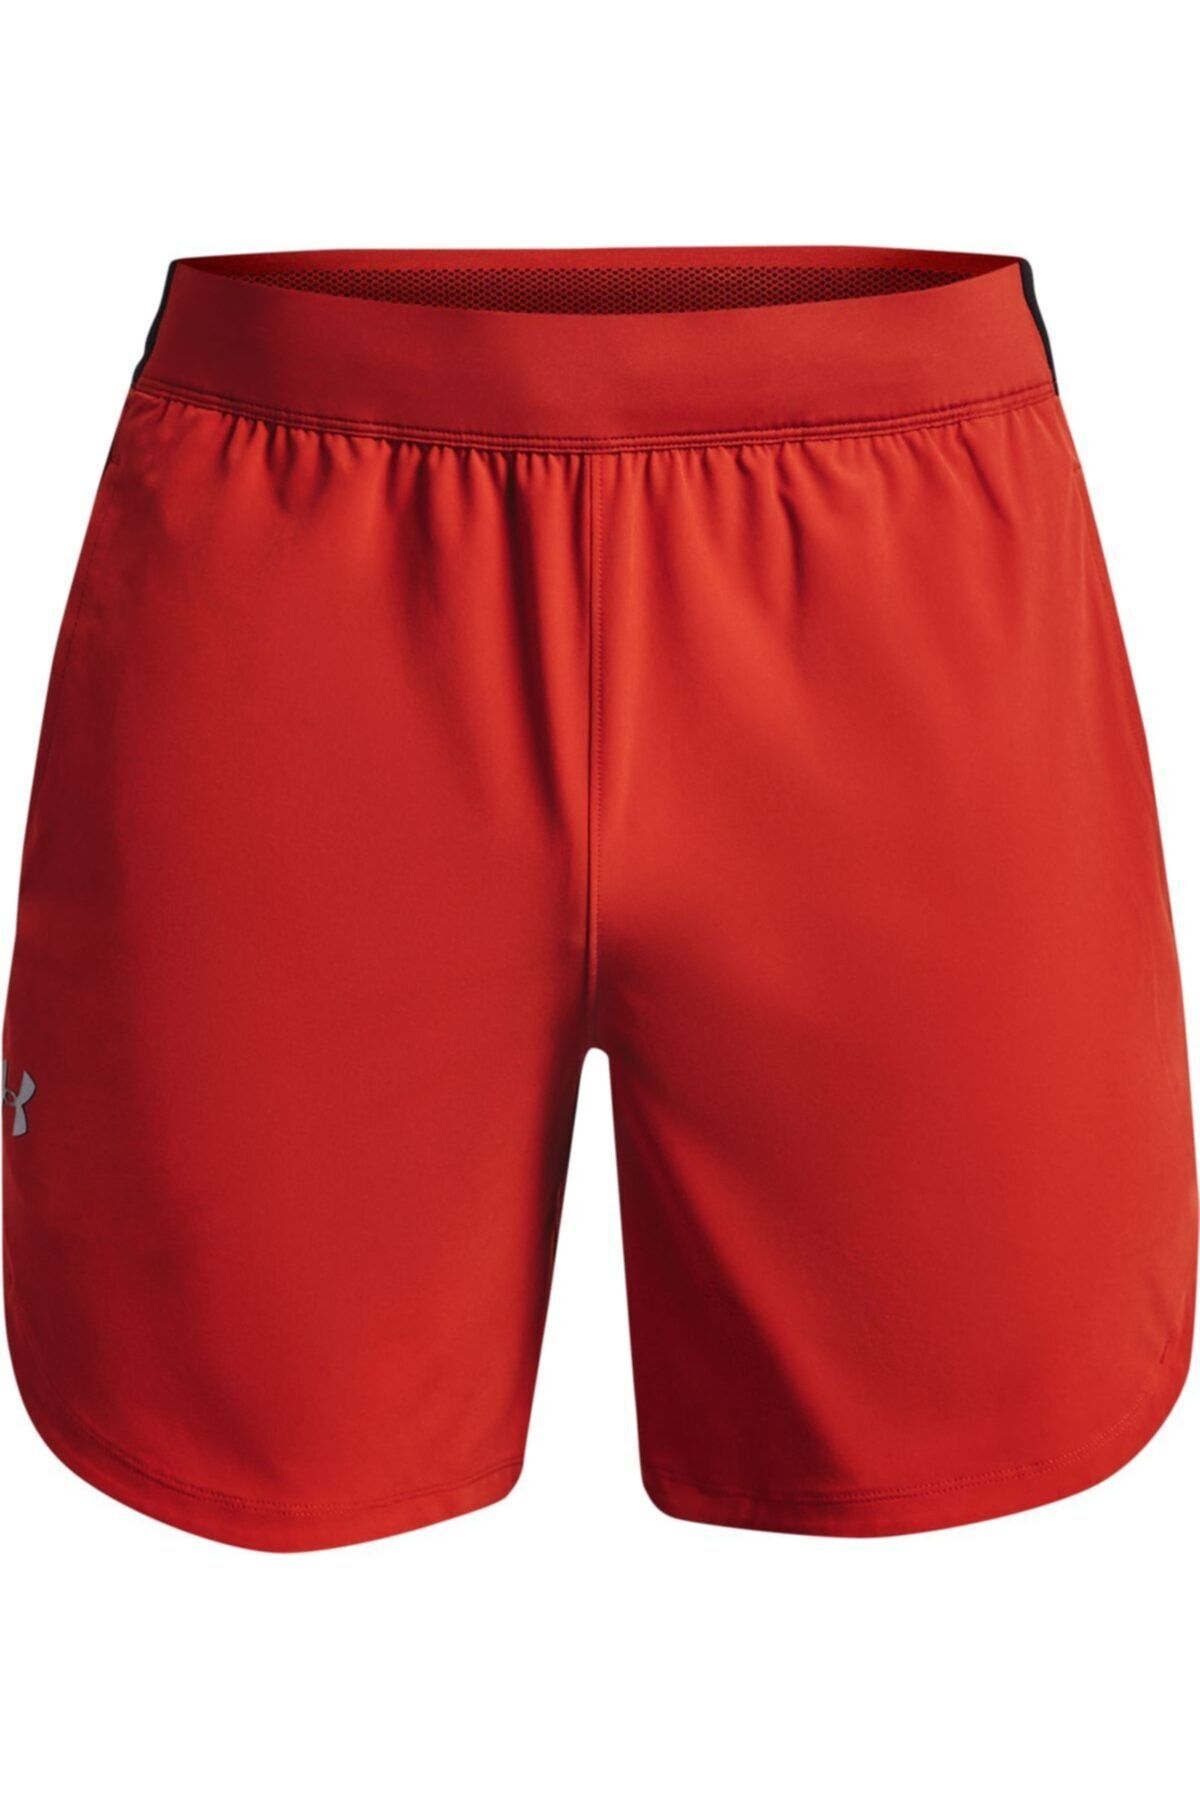 Under Armour Ua Stretch-woven Shorts 1351667-839